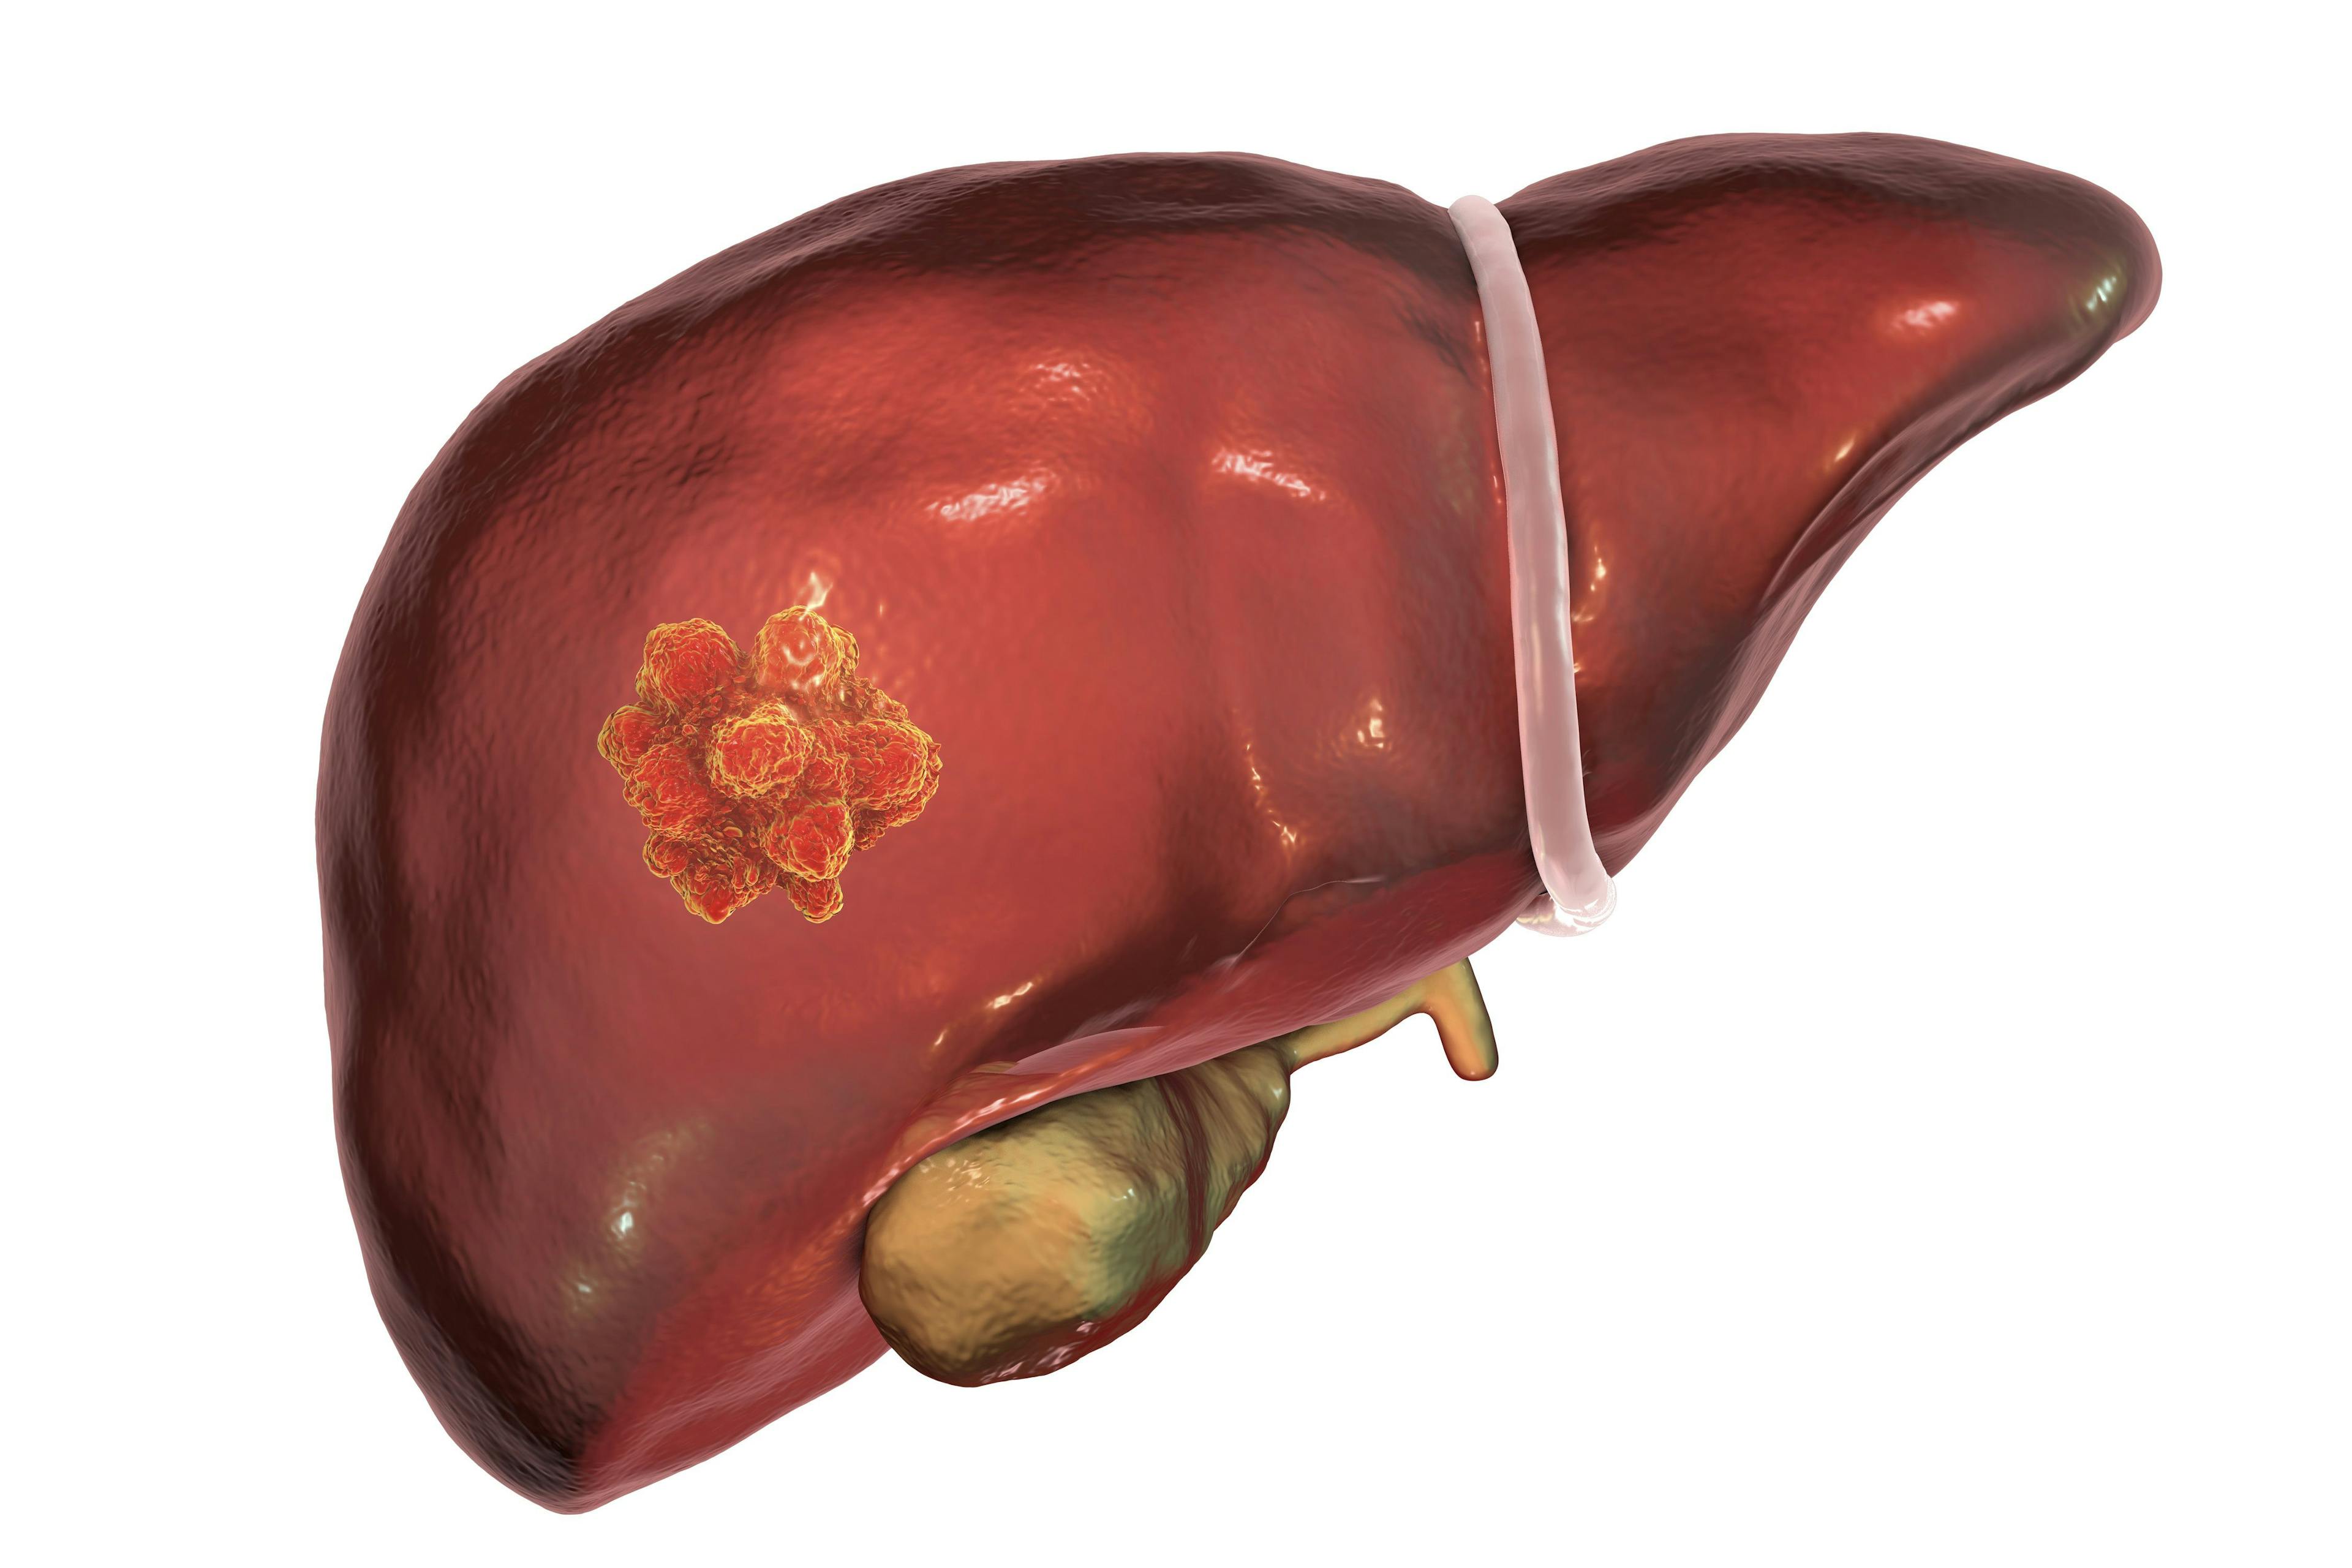 Developers are assessing the safety, tolerability, and preliminary efficacy of BST02 in patients with locally advanced or metastatic liver cancer in an investigator-initiated phase 1 trial (NCT06173726).